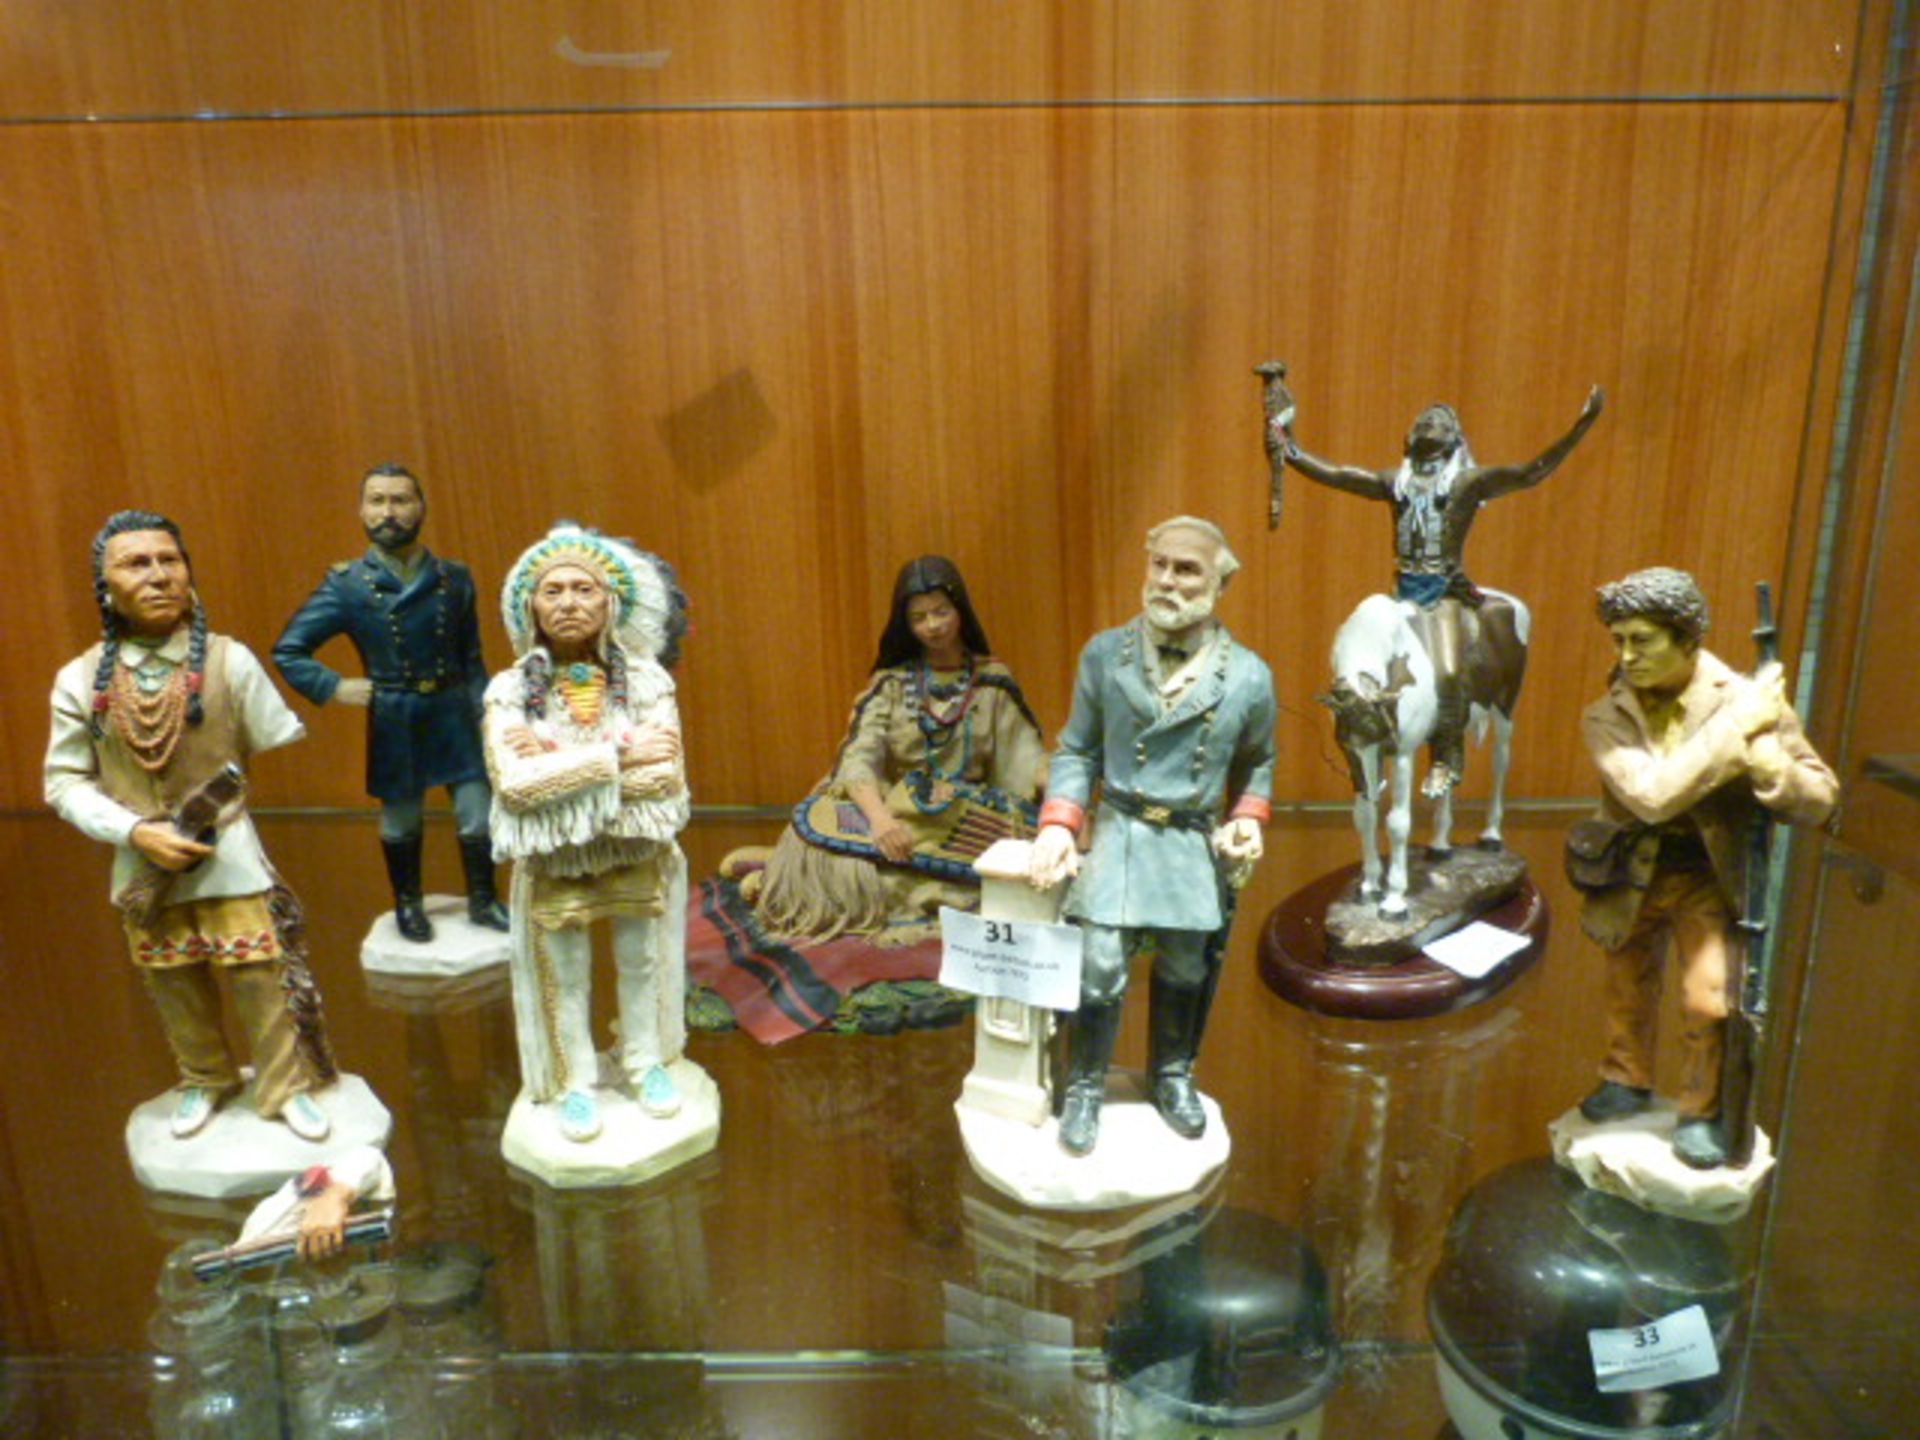 Collection of Italian Pottery Figurines - American